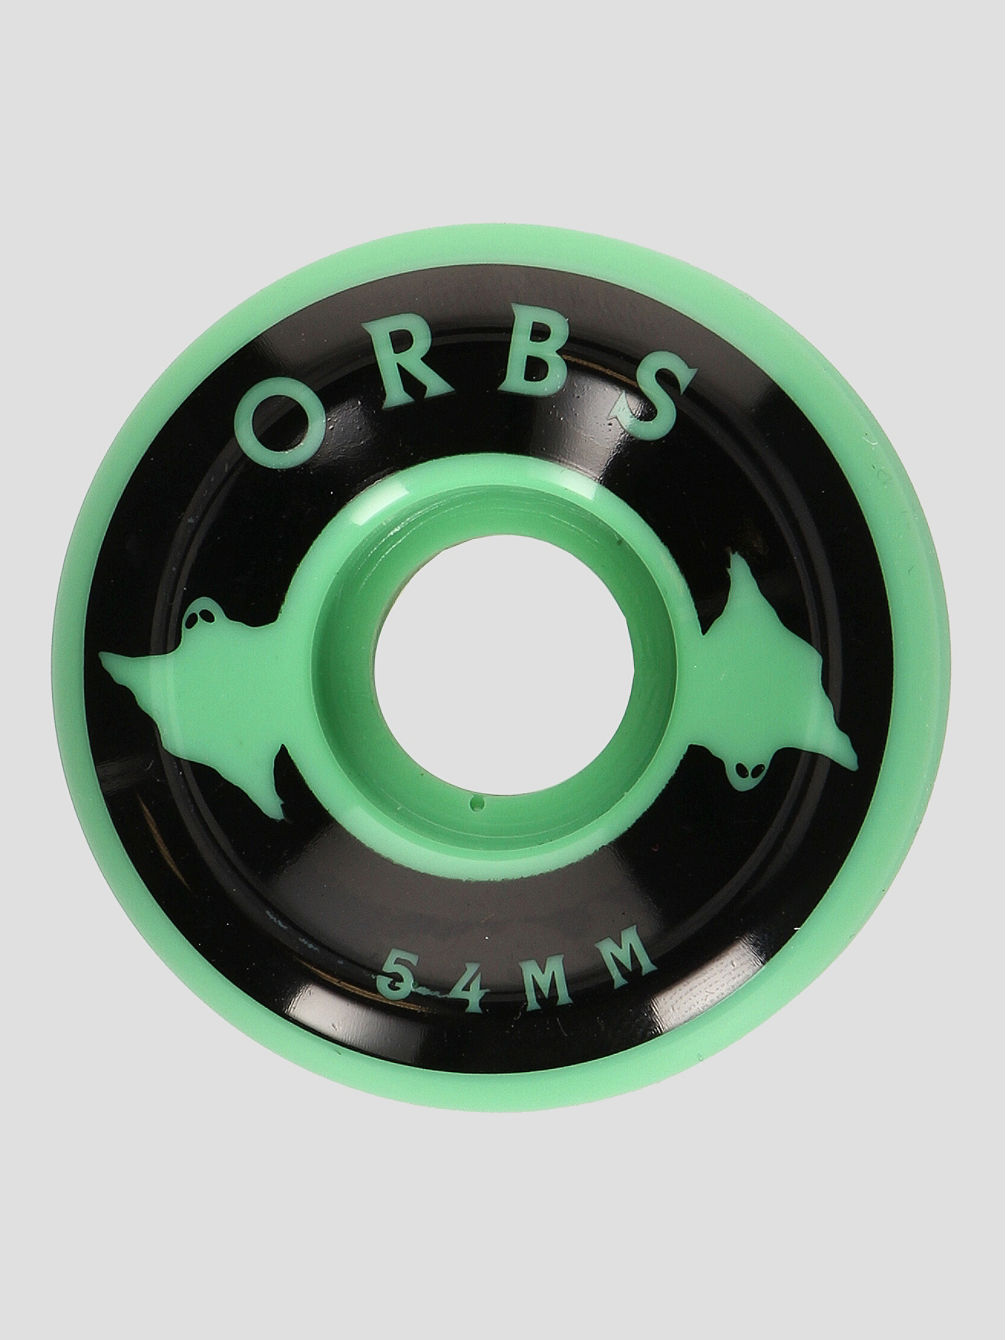 Orbs Specters - Conical - 99A 54mm Wheels